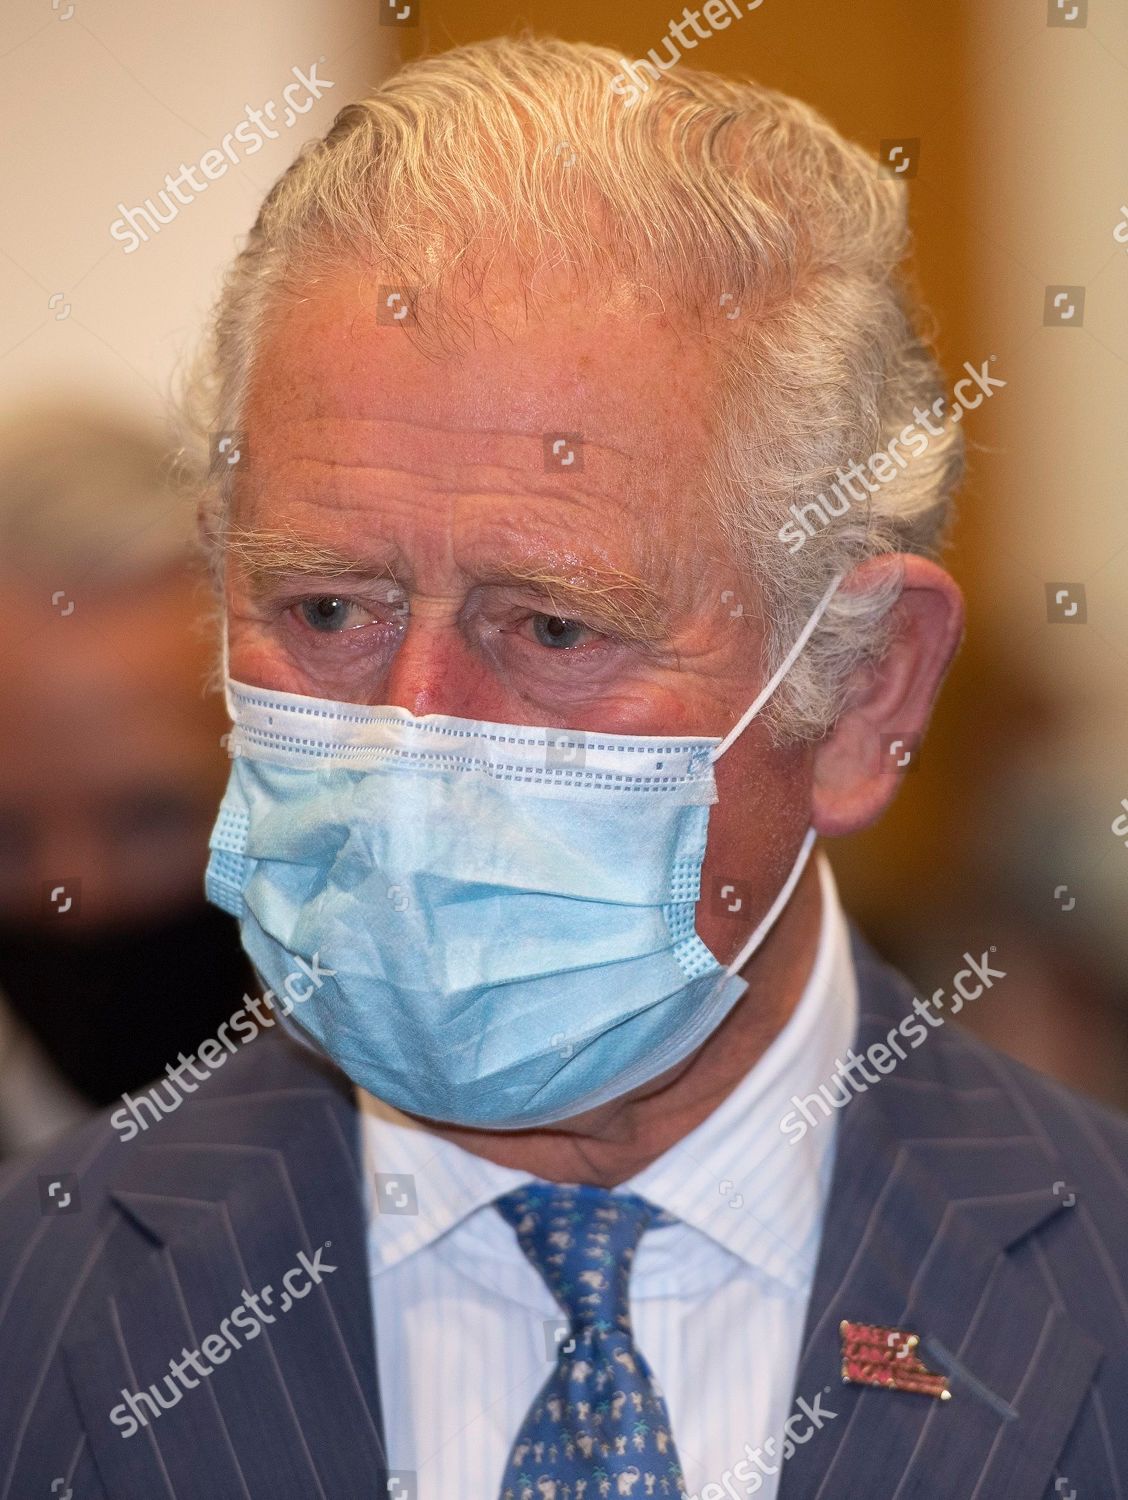 prince-charles-visits-the-breast-cancer-now-toby-robins-research-centre-london-uk-shutterstock-editorial-11902309q.jpg